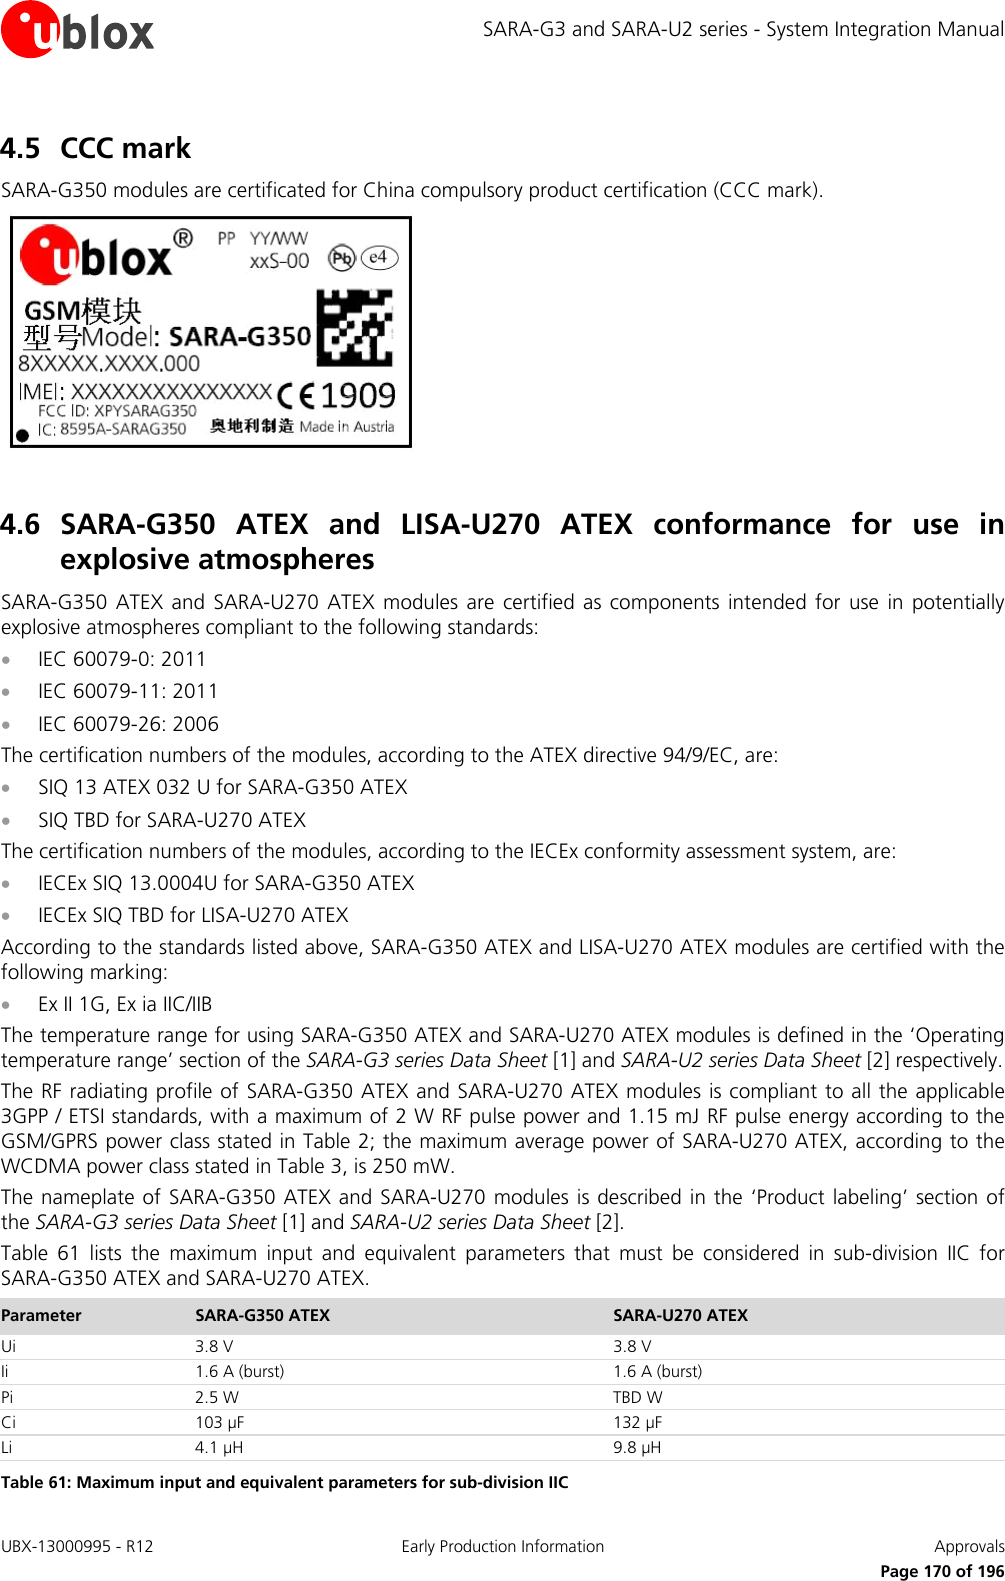 SARA-G3 and SARA-U2 series - System Integration Manual 4.5 CCC mark SARA-G350 modules are certificated for China compulsory product certification (CCC mark).   4.6 SARA-G350 ATEX and LISA-U270 ATEX conformance for use in explosive atmospheres SARA-G350 ATEX and SARA-U270 ATEX modules are certified as components intended for use in potentially explosive atmospheres compliant to the following standards: • IEC 60079-0: 2011 • IEC 60079-11: 2011 • IEC 60079-26: 2006 The certification numbers of the modules, according to the ATEX directive 94/9/EC, are: • SIQ 13 ATEX 032 U for SARA-G350 ATEX • SIQ TBD for SARA-U270 ATEX The certification numbers of the modules, according to the IECEx conformity assessment system, are: • IECEx SIQ 13.0004U for SARA-G350 ATEX • IECEx SIQ TBD for LISA-U270 ATEX According to the standards listed above, SARA-G350 ATEX and LISA-U270 ATEX modules are certified with the following marking: • Ex II 1G, Ex ia IIC/IIB The temperature range for using SARA-G350 ATEX and SARA-U270 ATEX modules is defined in the ‘Operating temperature range’ section of the SARA-G3 series Data Sheet [1] and SARA-U2 series Data Sheet [2] respectively.  The RF radiating profile of SARA-G350 ATEX and SARA-U270 ATEX modules is compliant to all the applicable 3GPP / ETSI standards, with a maximum of 2 W RF pulse power and 1.15 mJ RF pulse energy according to the GSM/GPRS power class stated in Table 2; the maximum average power of SARA-U270 ATEX, according to the WCDMA power class stated in Table 3, is 250 mW. The nameplate of SARA-G350 ATEX and SARA-U270 modules is described in the ‘Product labeling’ section of the SARA-G3 series Data Sheet [1] and SARA-U2 series Data Sheet [2]. Table  61 lists the maximum input and equivalent parameters that  must be considered in sub-division IIC for SARA-G350 ATEX and SARA-U270 ATEX. Parameter SARA-G350 ATEX SARA-U270 ATEX Ui 3.8 V 3.8 V Ii 1.6 A (burst) 1.6 A (burst) Pi 2.5 W TBD W Ci 103 µF 132 µF Li 4.1 µH 9.8 µH Table 61: Maximum input and equivalent parameters for sub-division IIC UBX-13000995 - R12 Early Production Information Approvals     Page 170 of 196 